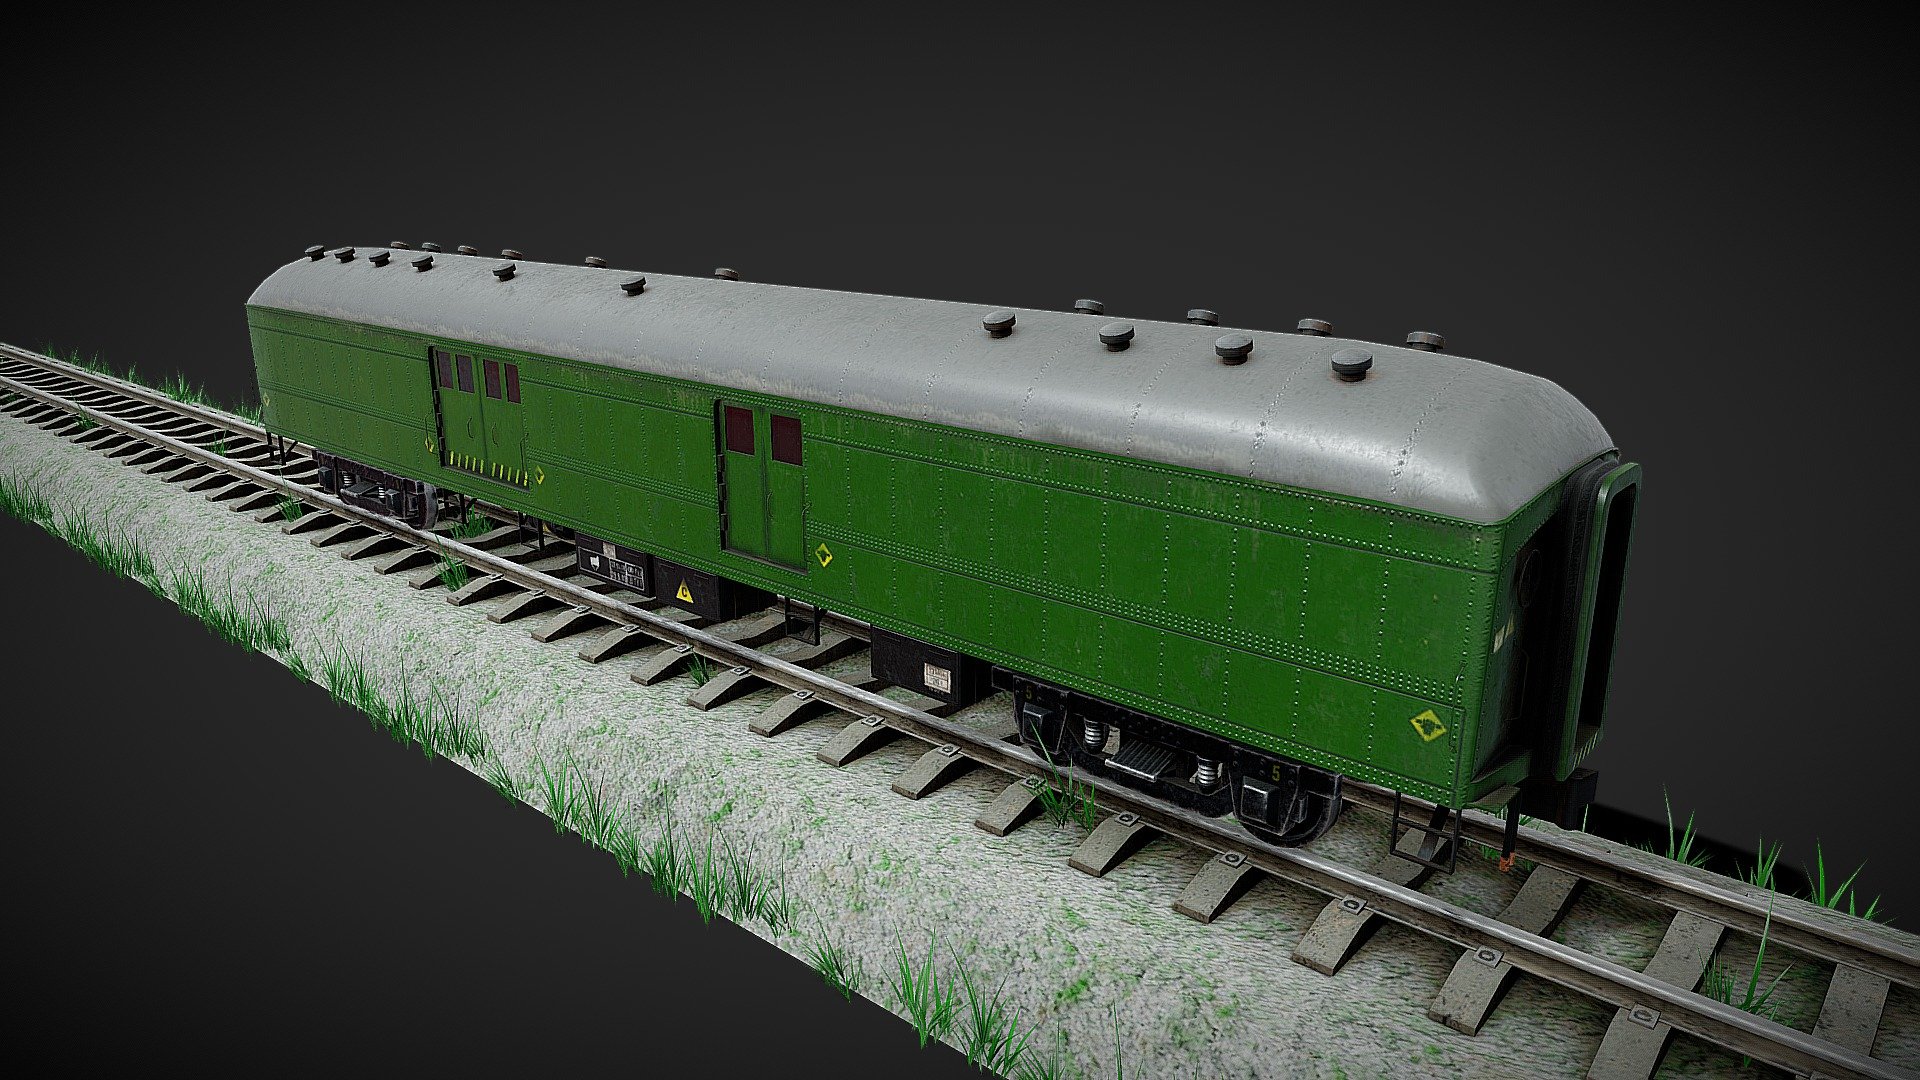 Game ready model. Separating parts : carts, wheels, wagon, railway (modular),grass. Model scale Unity engine 3d model